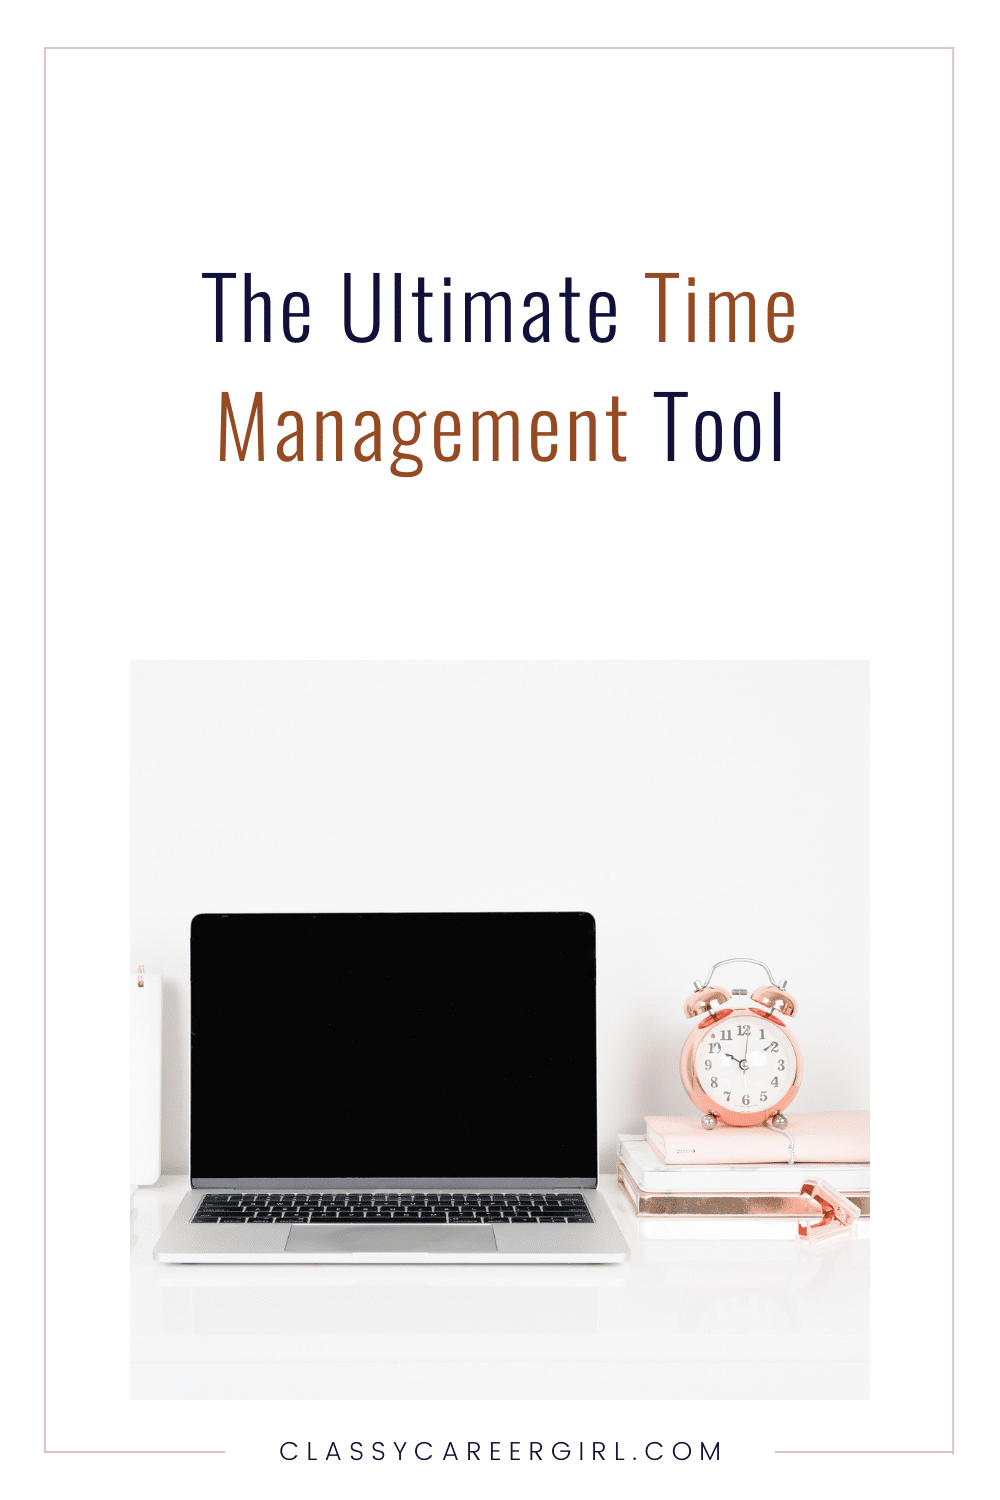 CCG Pin - The Ultimate Time Management Tool